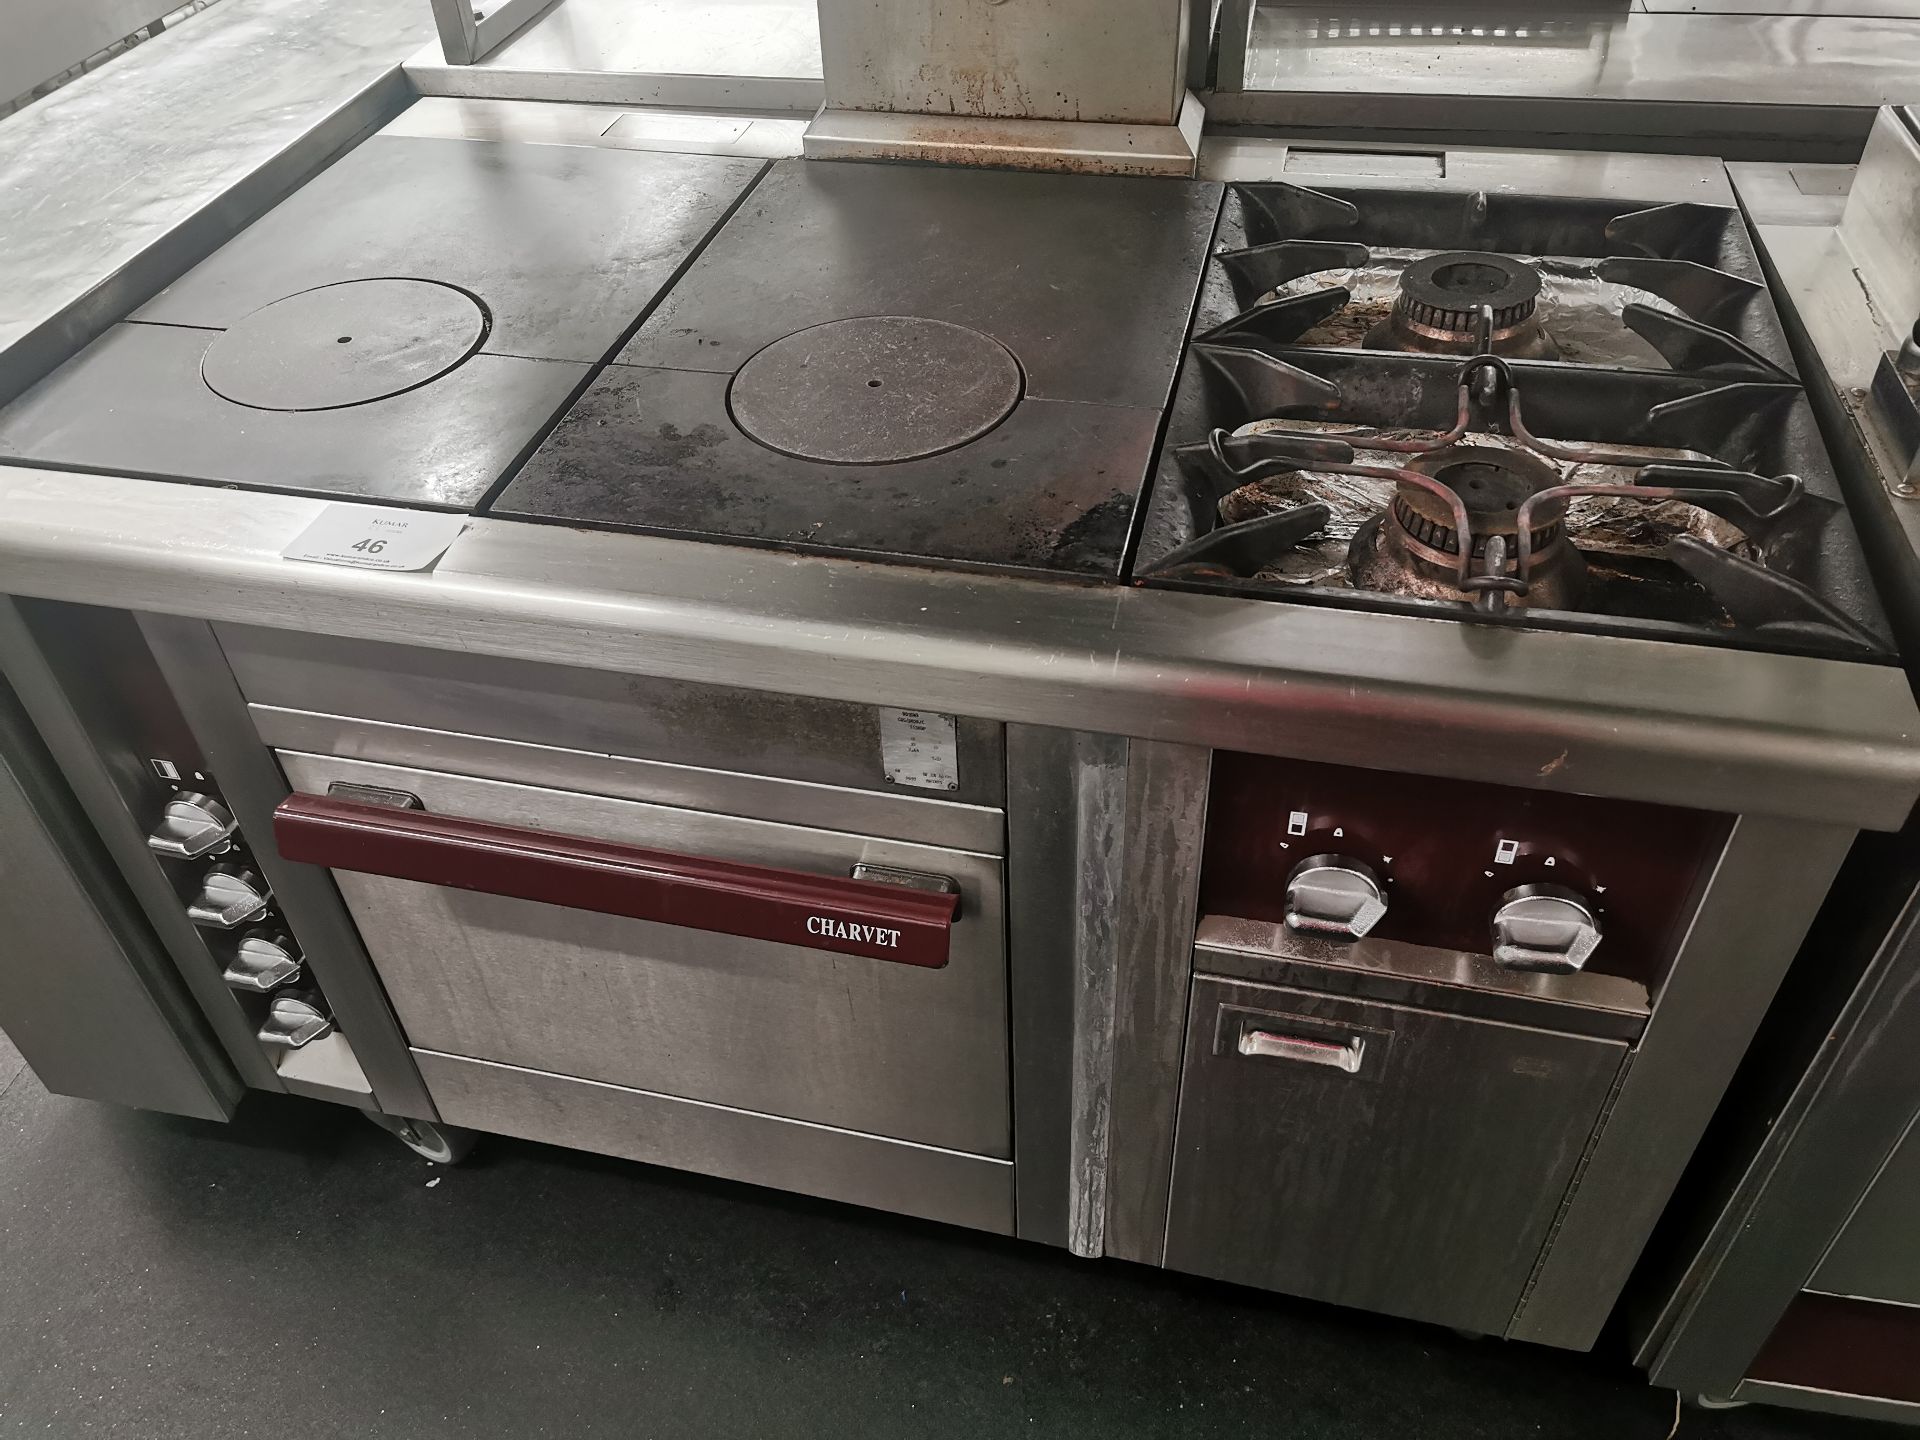 Charvet pro series hot plate oven and hob W 127cm